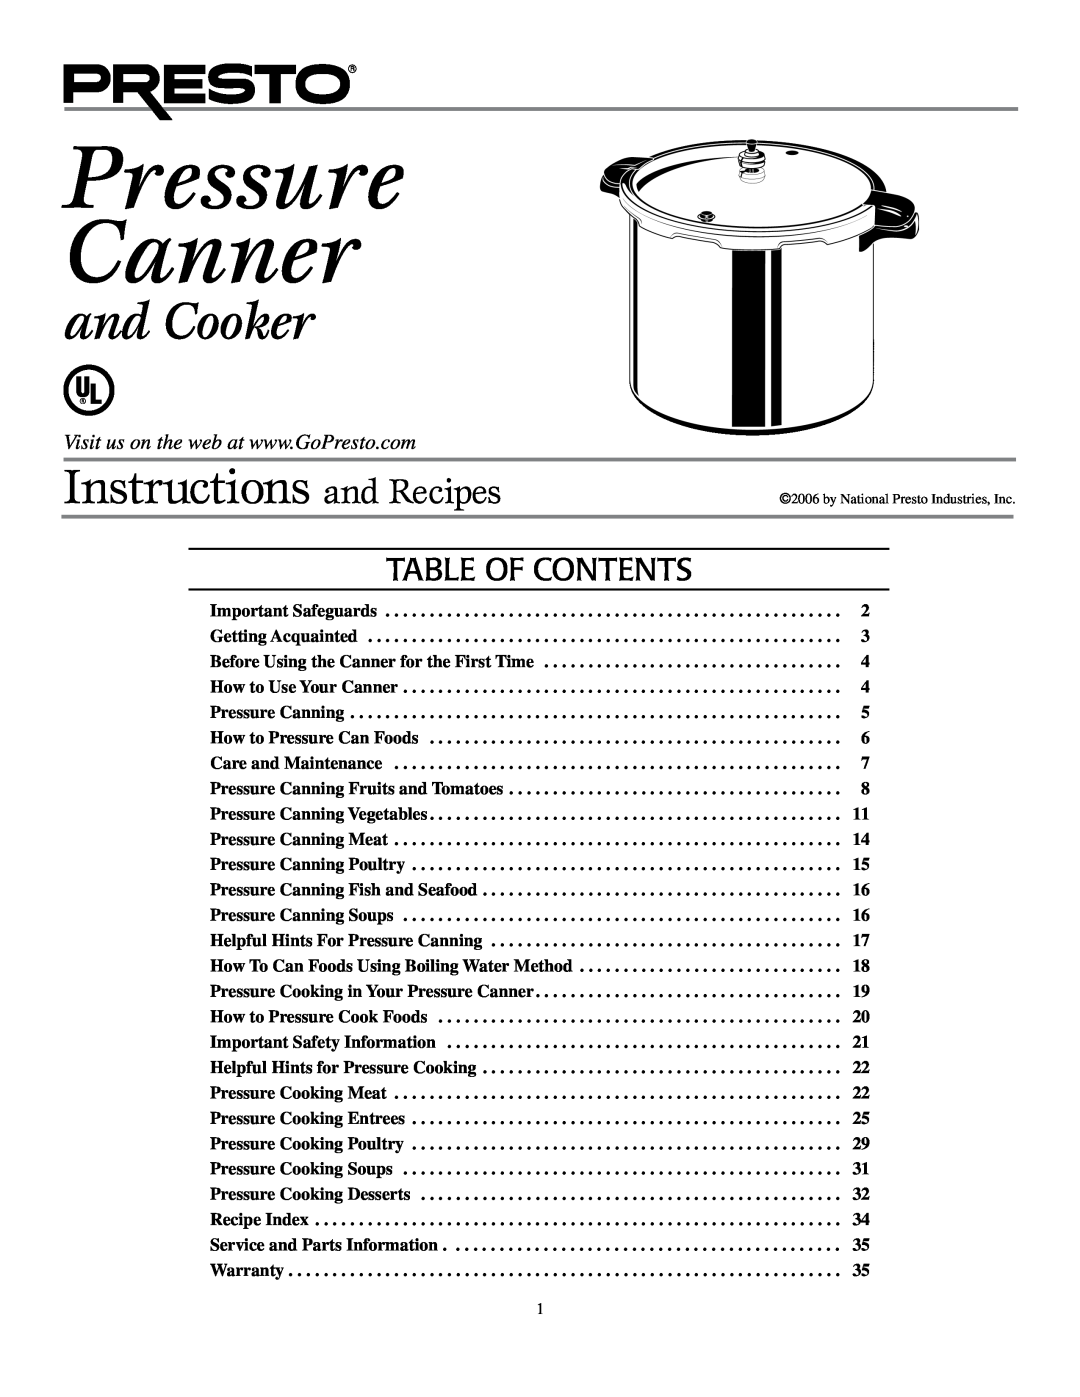 Presto Pressure Canner and Cooker warranty Table of Contents, Instructions and Recipes, Helpful Hints For Pressure Canning 